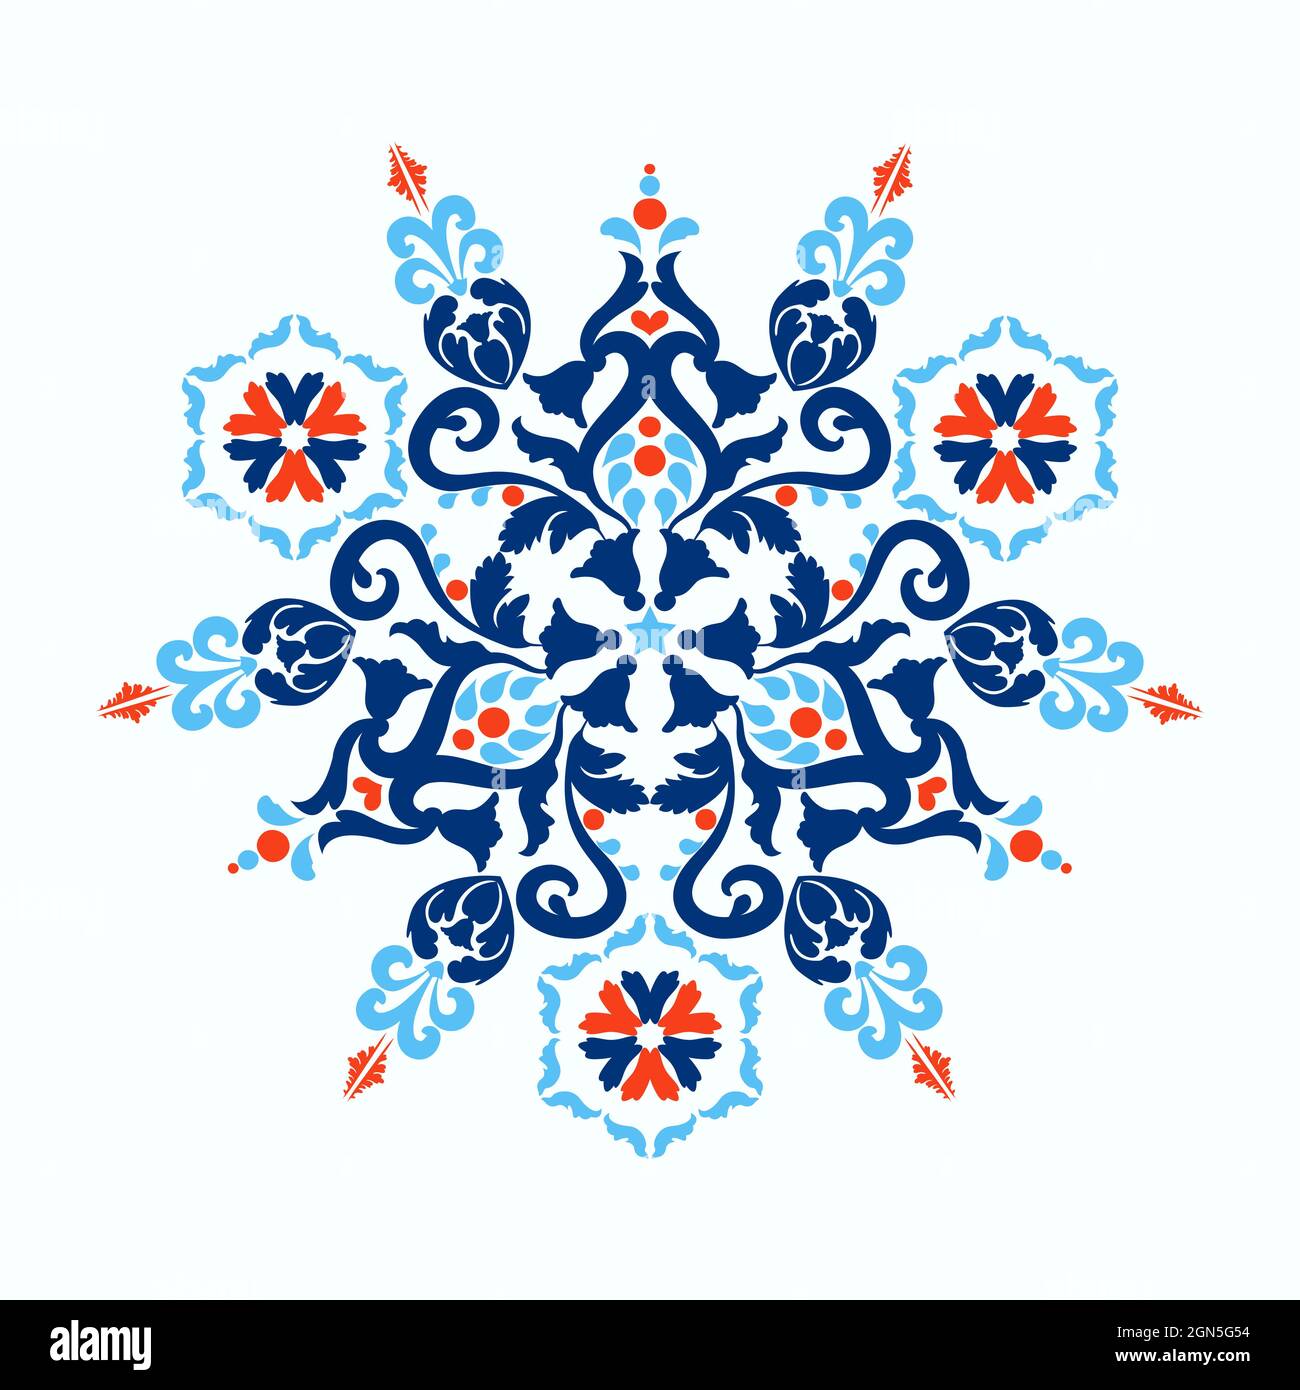 Vintage damask pattern with floral elements. Arabesque ornament. Blue, red, white colors. Decorative tiles with ornaments. Vector illustration. Stock Vector